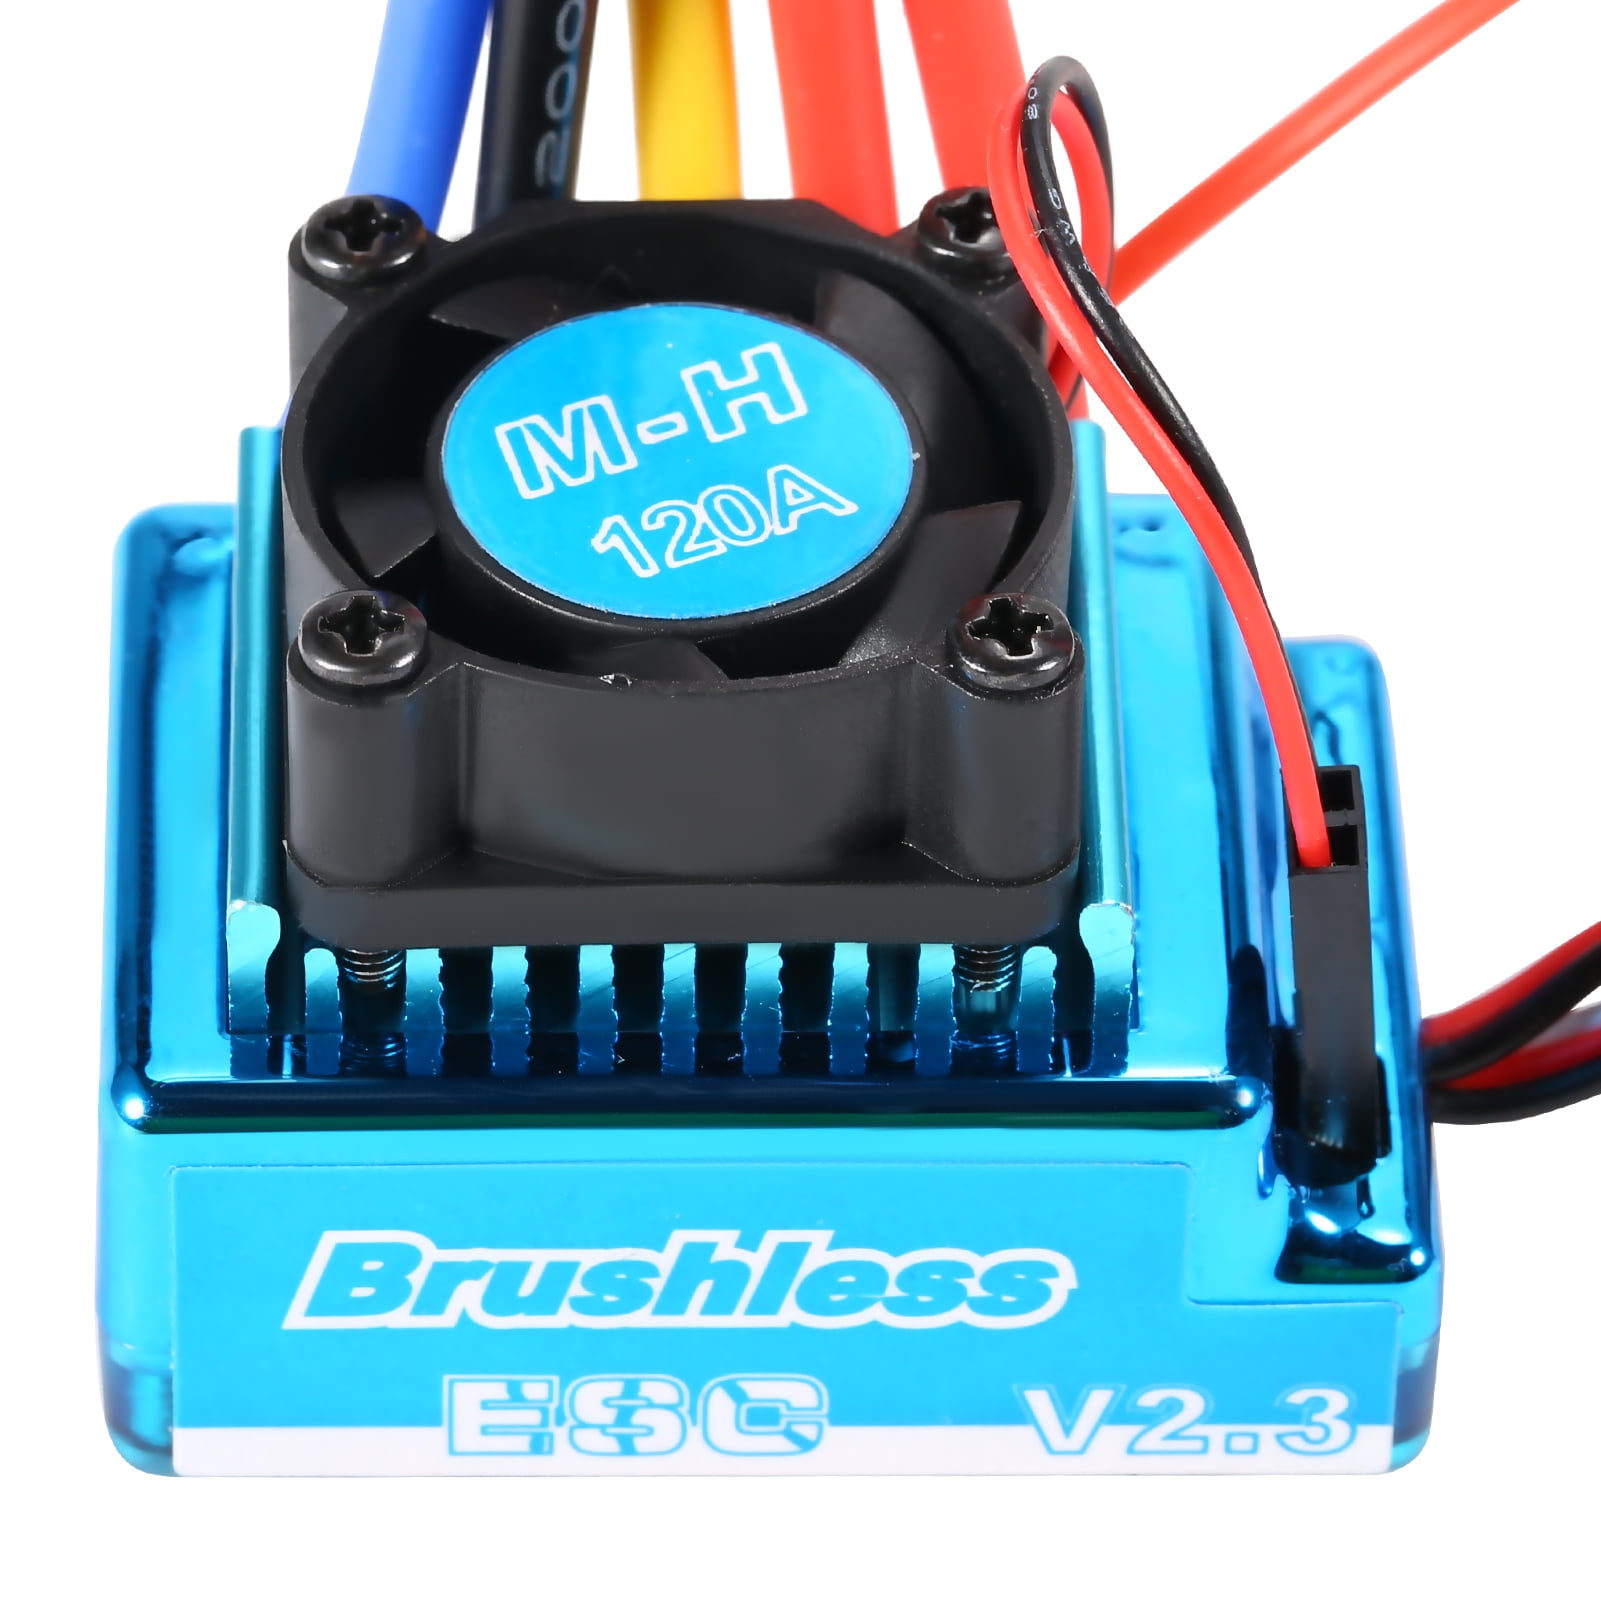 Walmeck 120A Brushless ESC Electric Speed Controller 6.0V/3A BEC for 1/8 1/10 RC Car